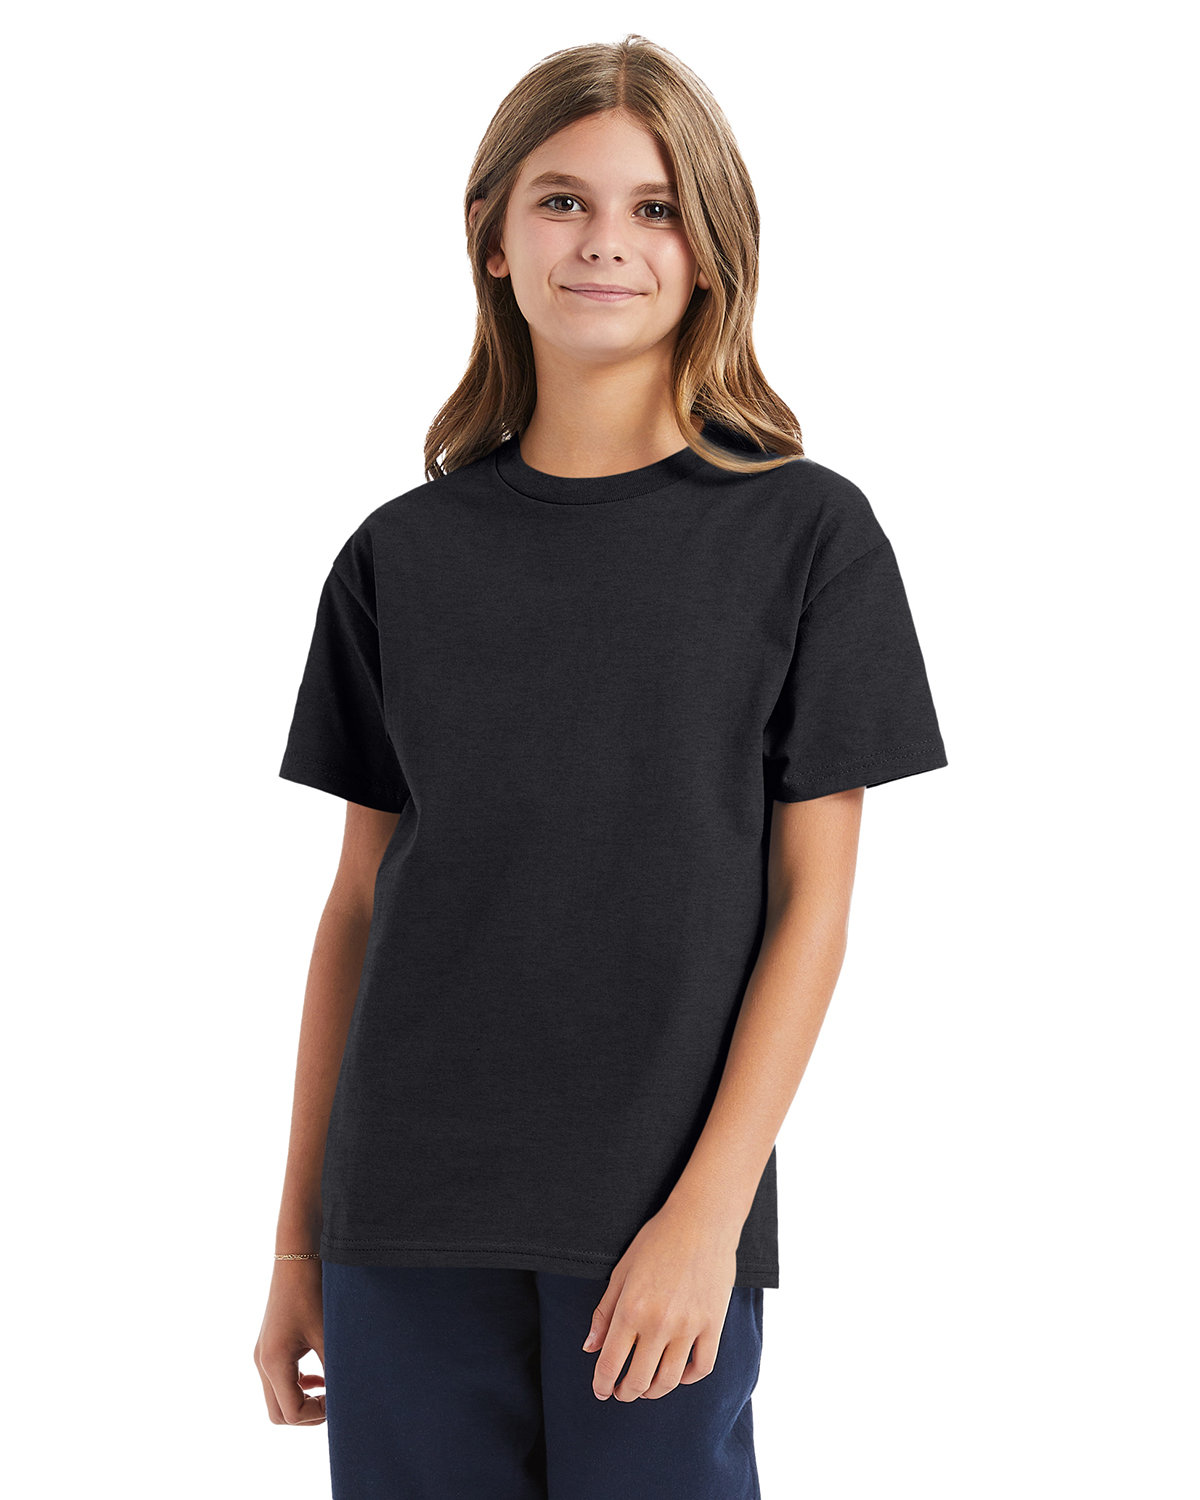 Kids Shirt by Hanes Size 10-12, Gray in Color Rn 15763